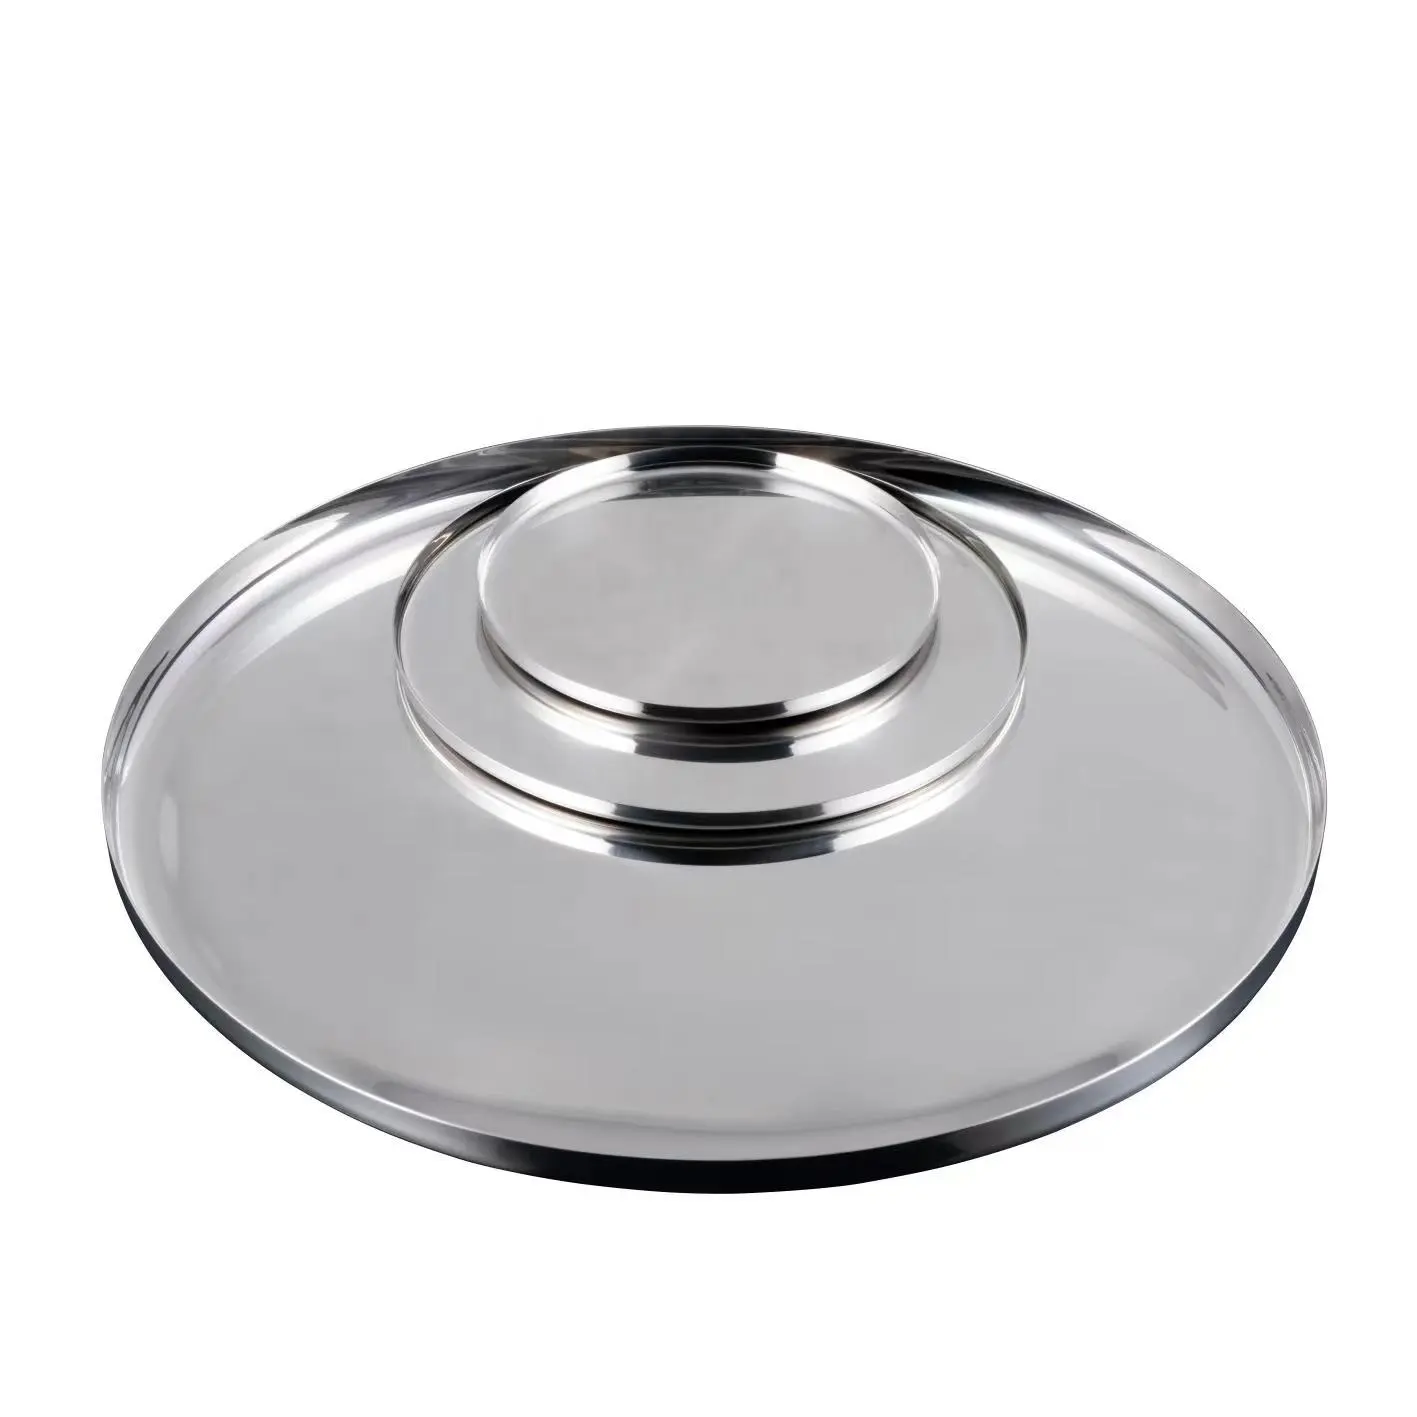 Restaurant Gold Serving Tray Round Dessert Stainless Steel Dinner Plates Cake Snack Dish Silver Storage Plate For Wedding Party